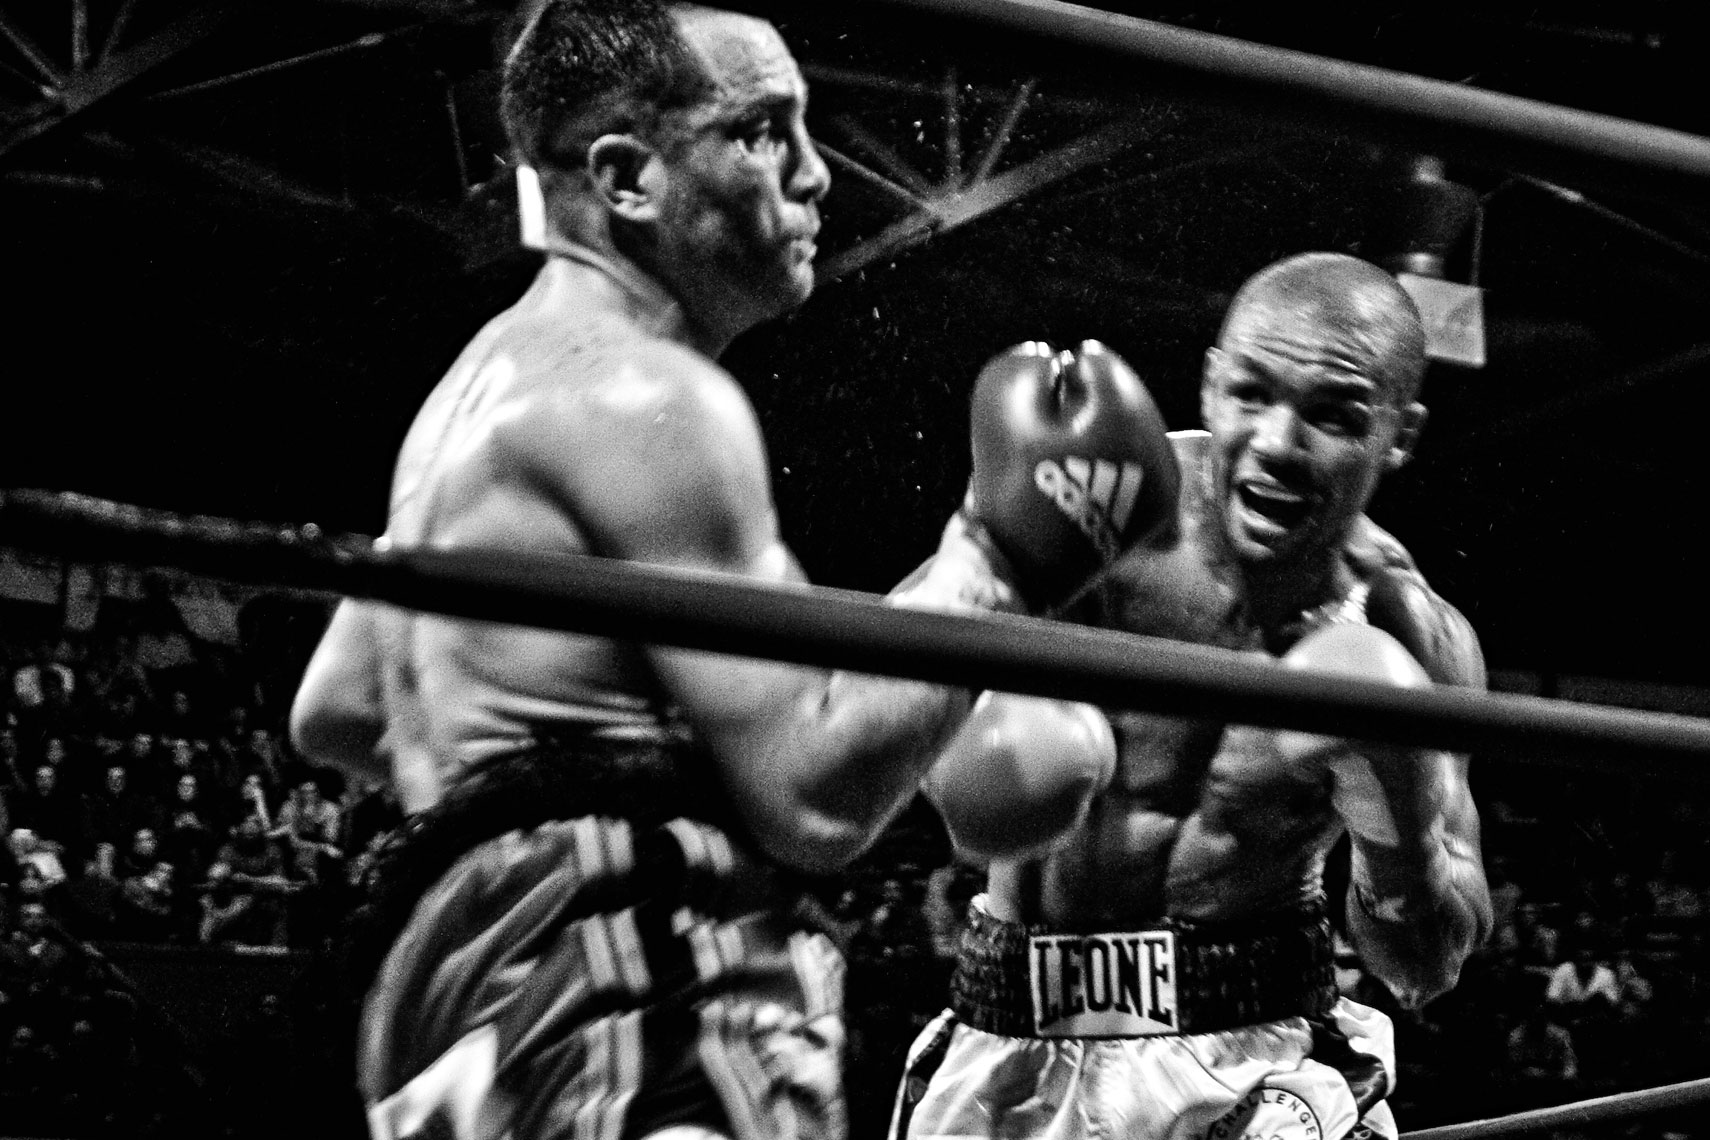 ITALY. Florence, 4th November 2011. Mandela Forum, the night of the match for the EBU (European Boxing Union) Welter Weight crown, Leonard Bundu and Daniele Petrucci fighting.